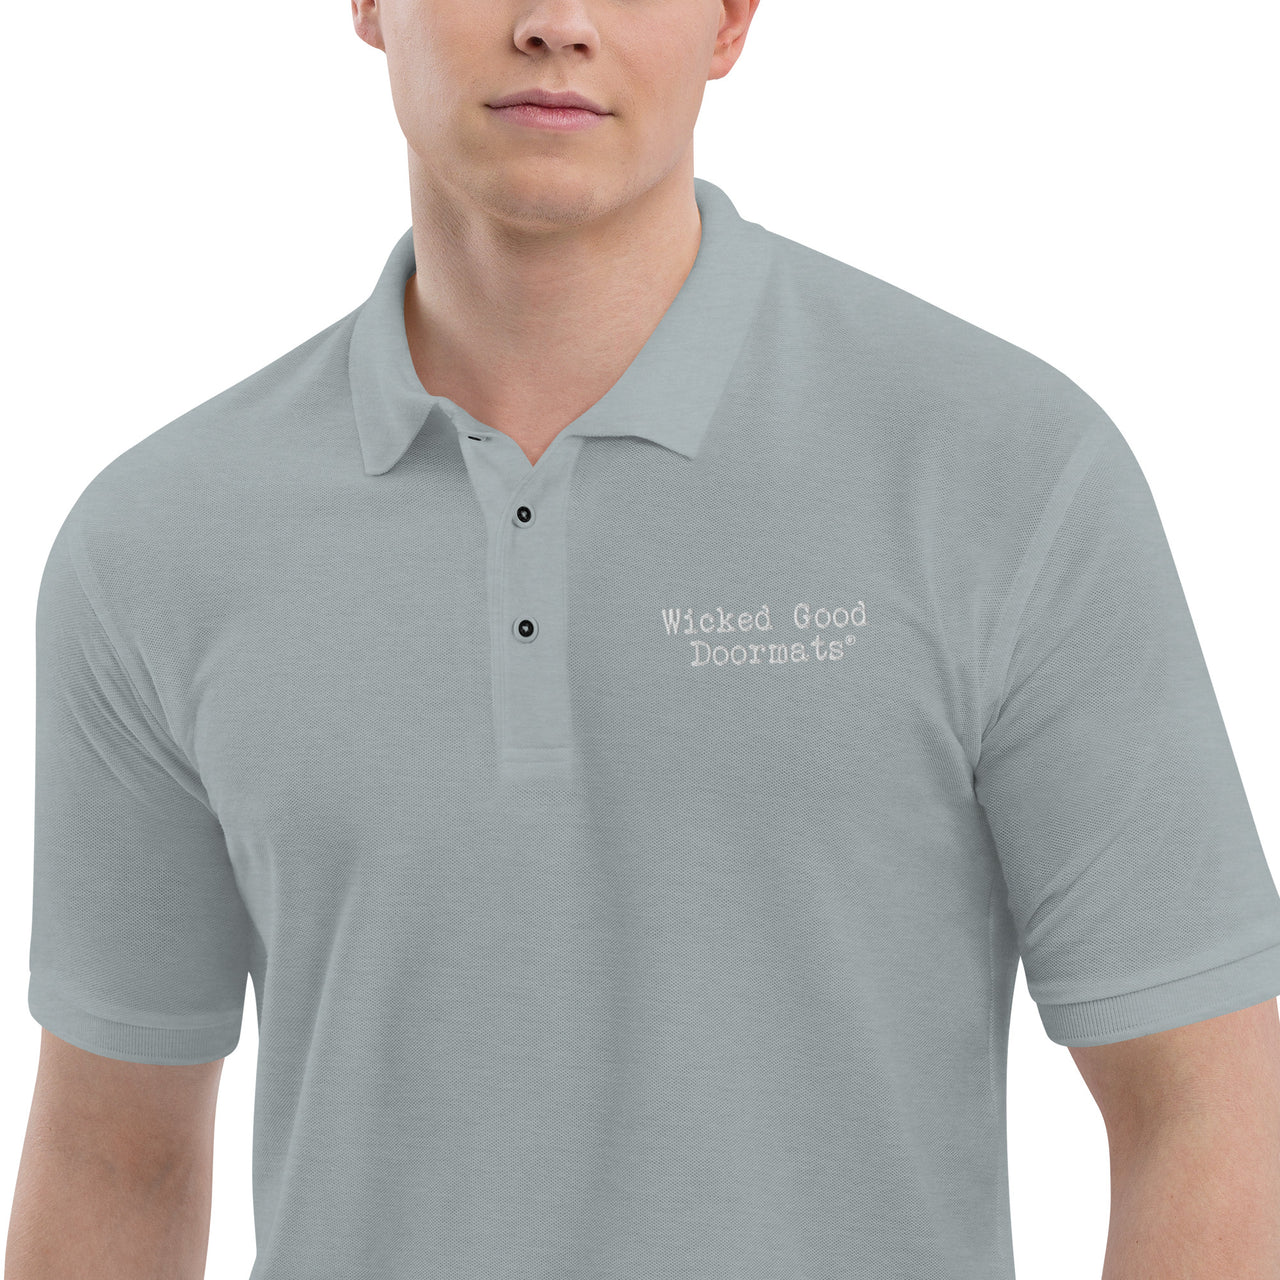 Men's Premium Polo Shirts & Tops New England Trading Co Cool Heather S 